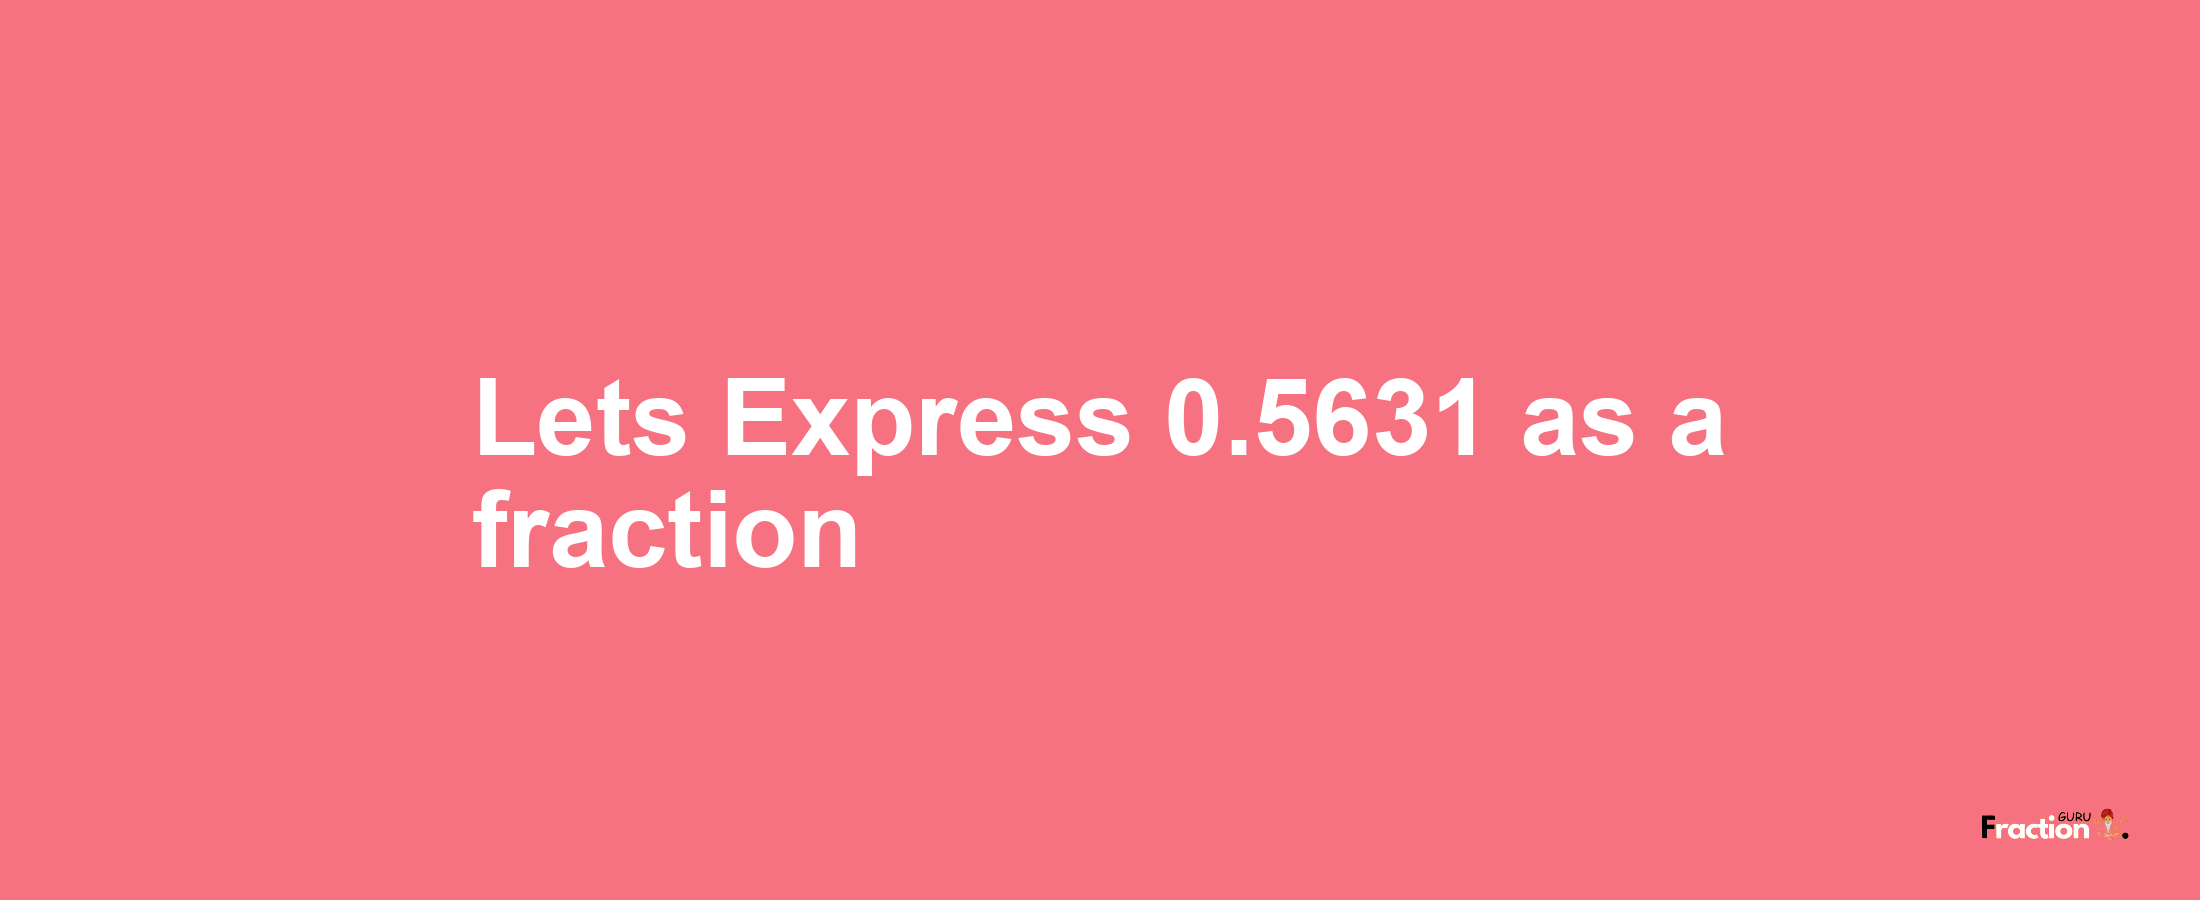 Lets Express 0.5631 as afraction